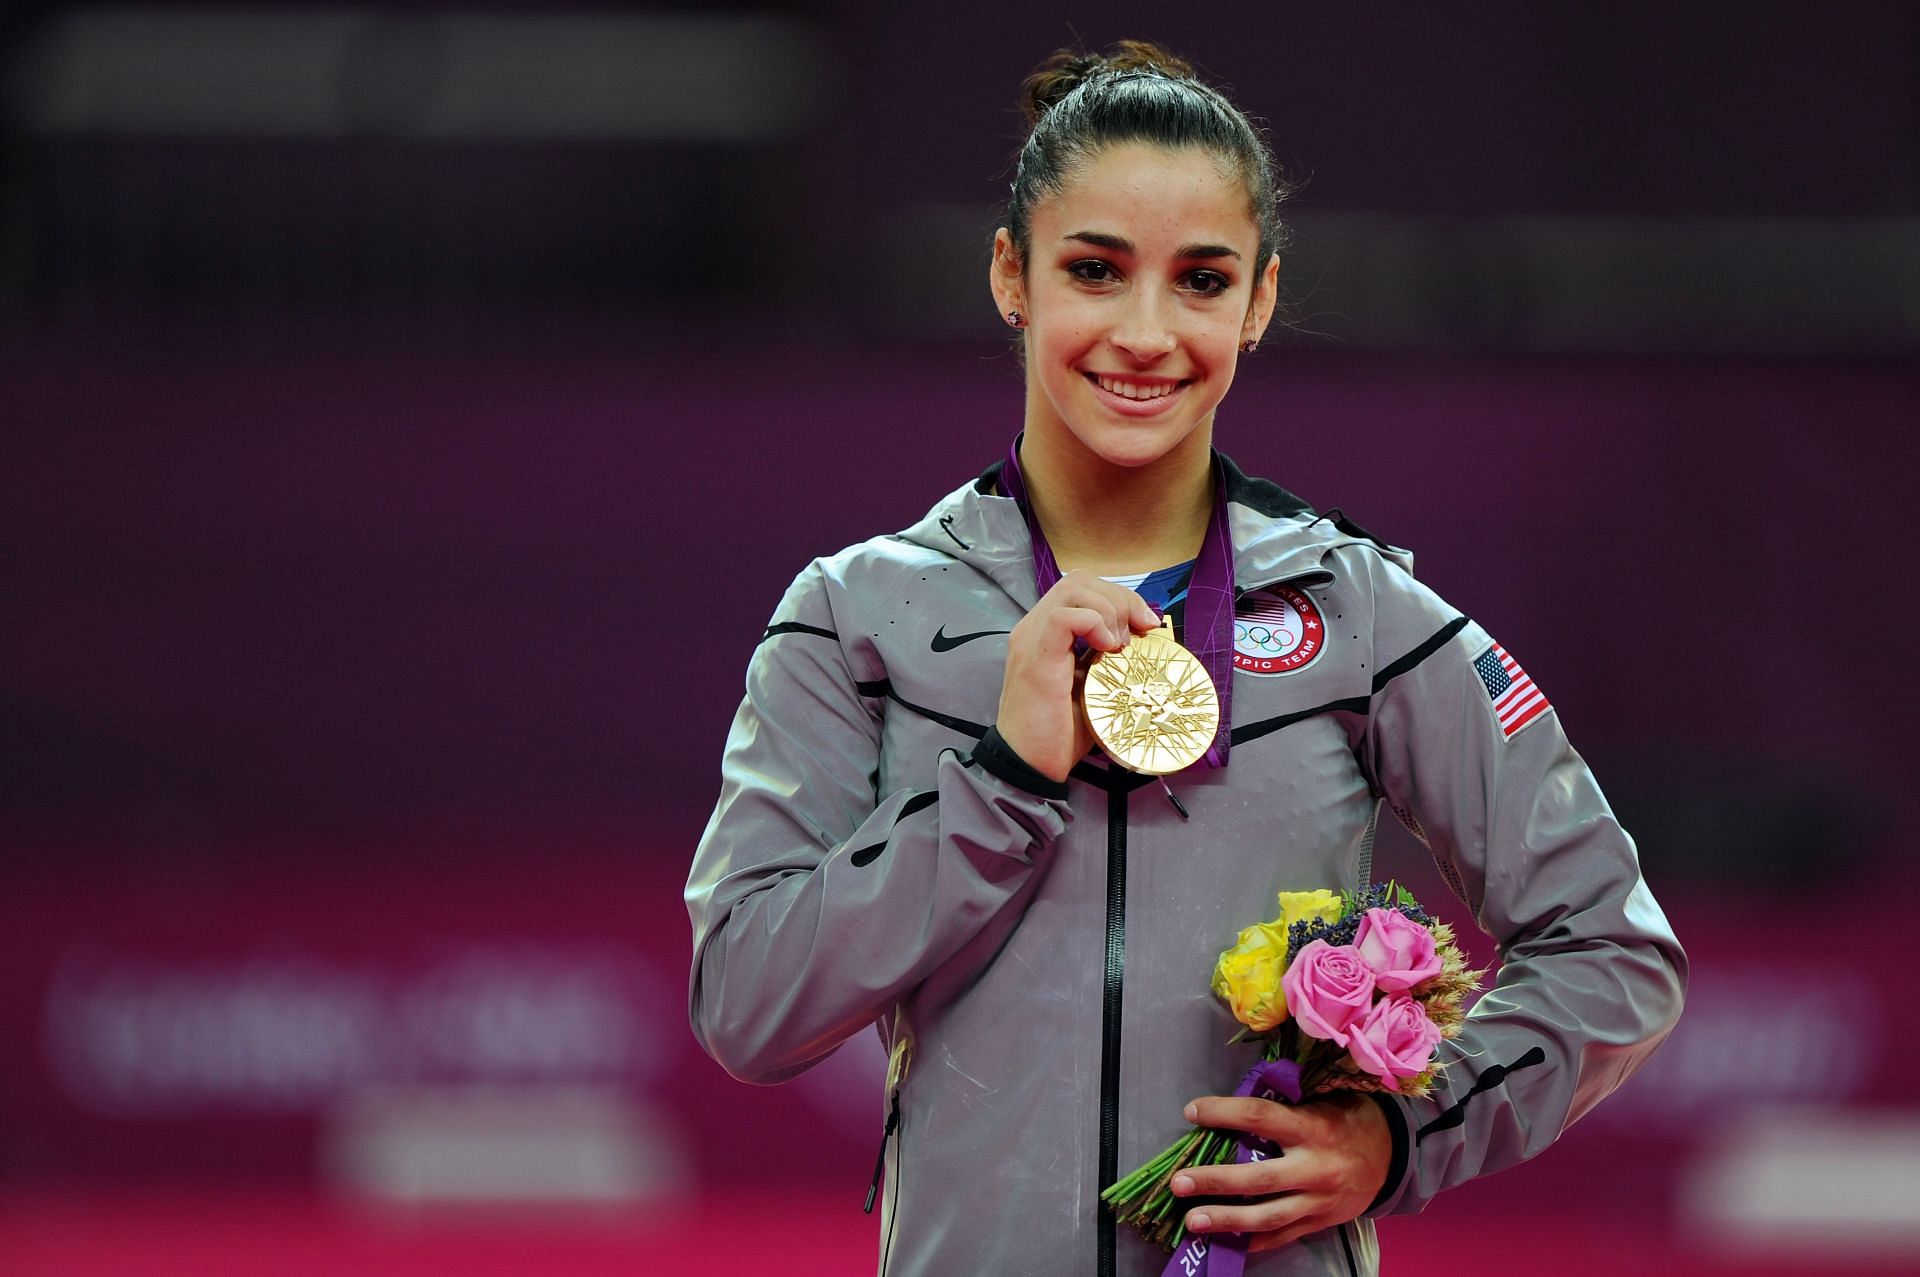 Raisman with the gold medal at the London Olympics Day 11